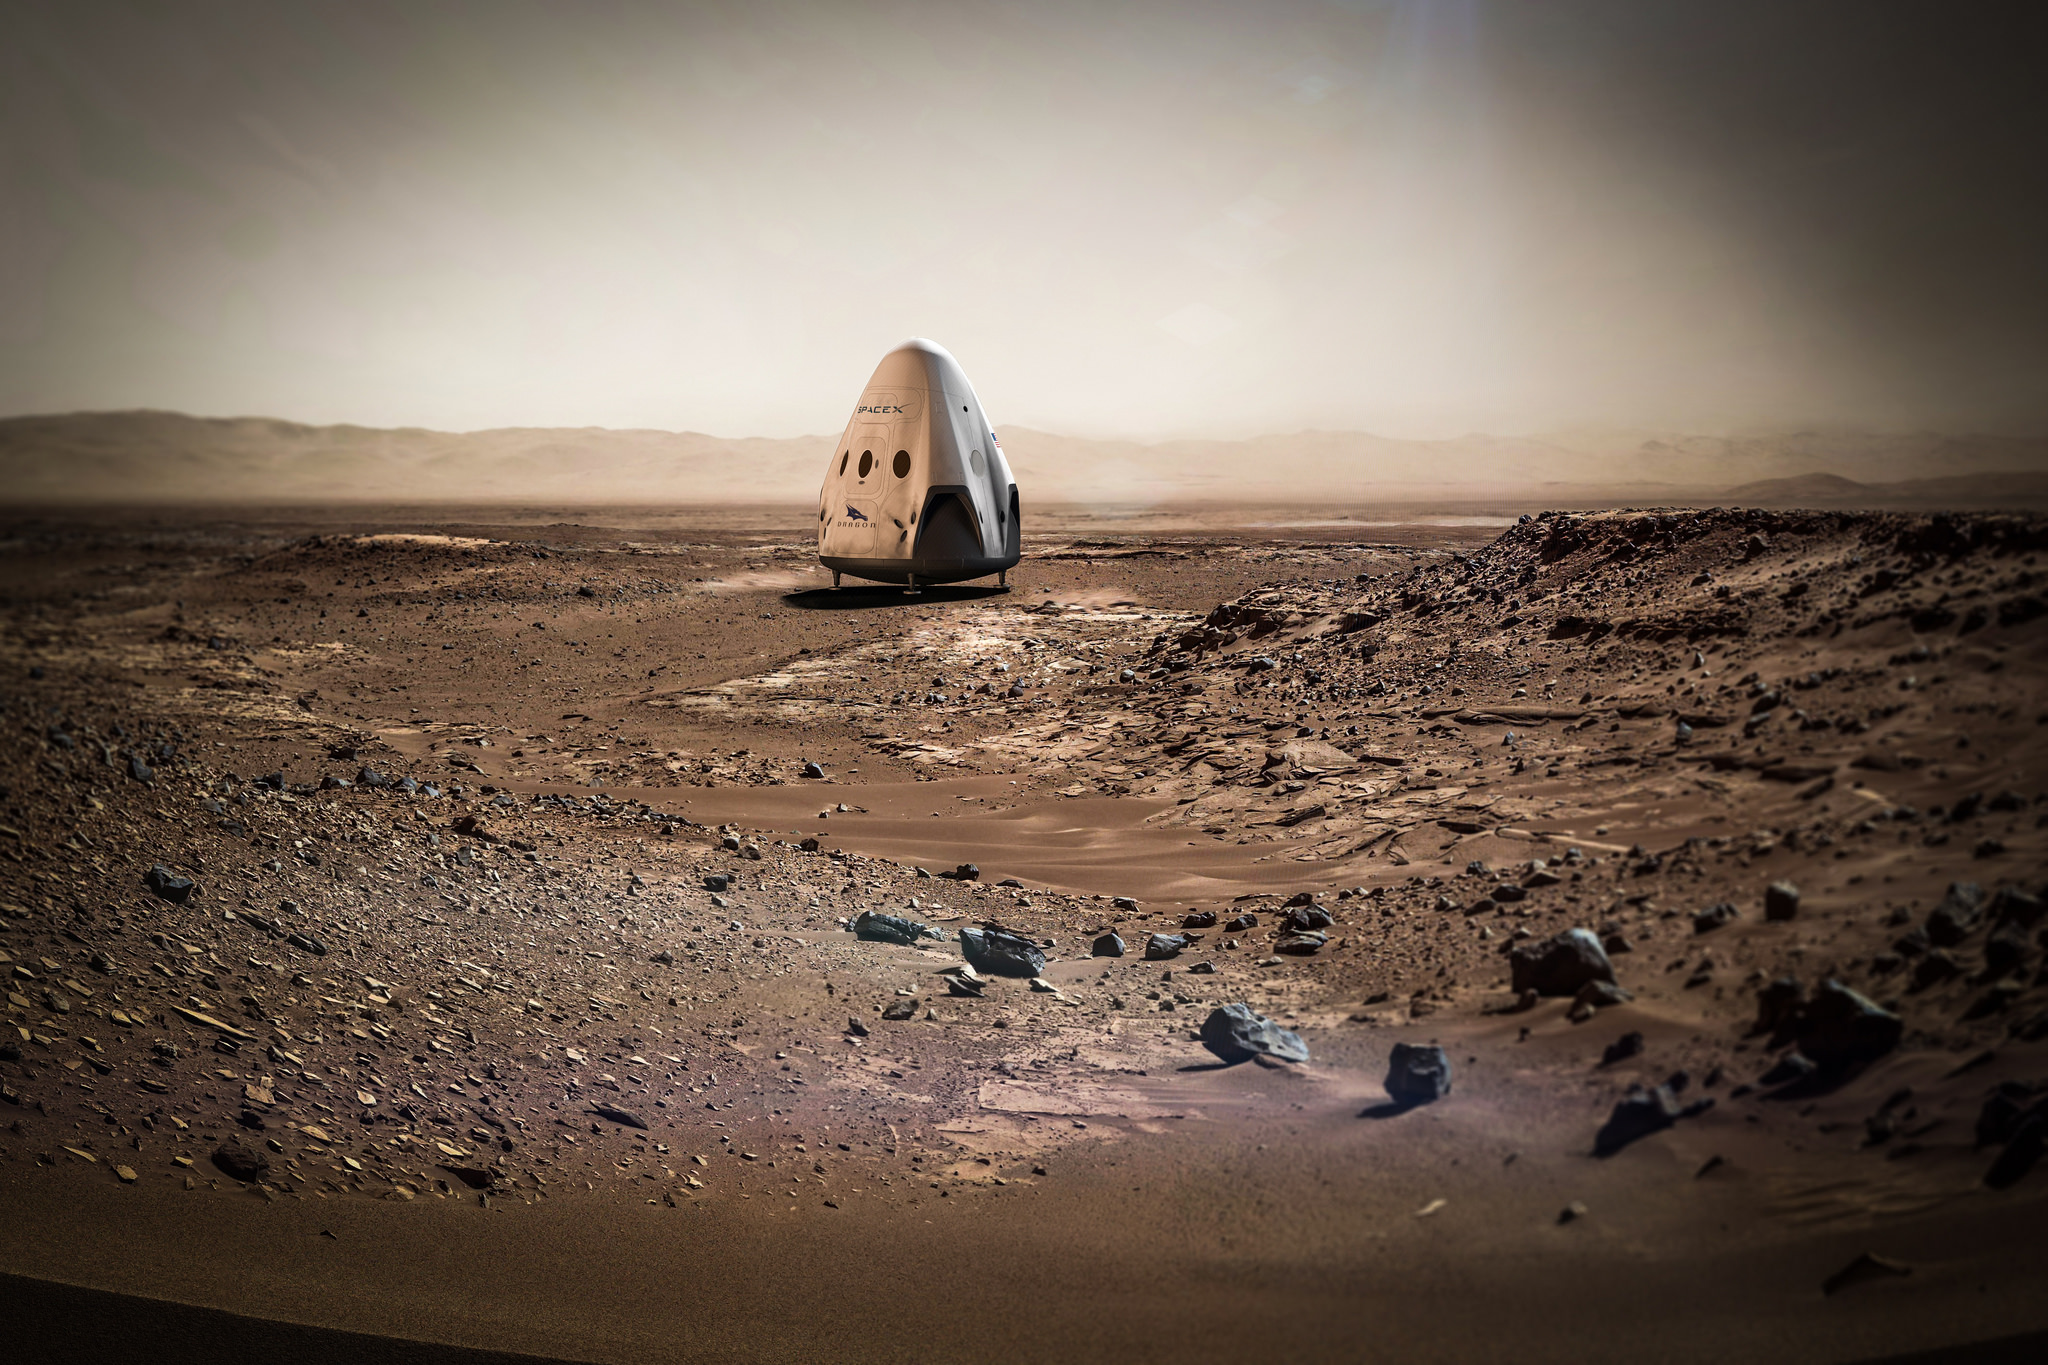 Mars has long been the goal for SpaceX and its billionaire CEO Elon Musk. Musk has said repeatedly that his goal is to make humanity become a two-planet species.